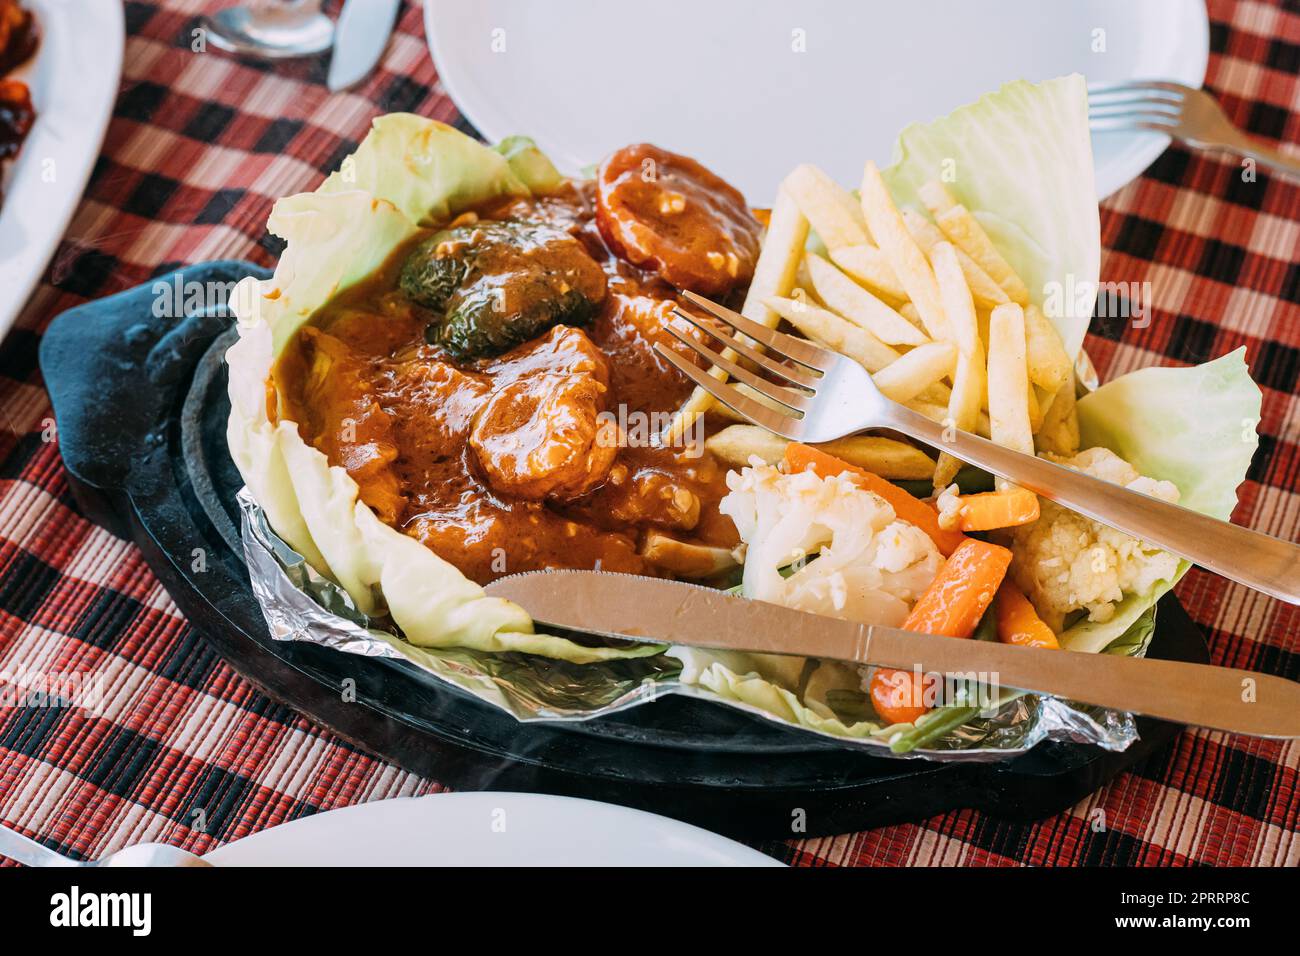 https://c8.alamy.com/comp/2PRRP8C/goa-india-dish-of-indian-national-cuisine-is-sizzler-which-consist-of-french-fries-fried-shrimp-in-sauce-fried-vegetables-traditional-dish-of-goa-2PRRP8C.jpg